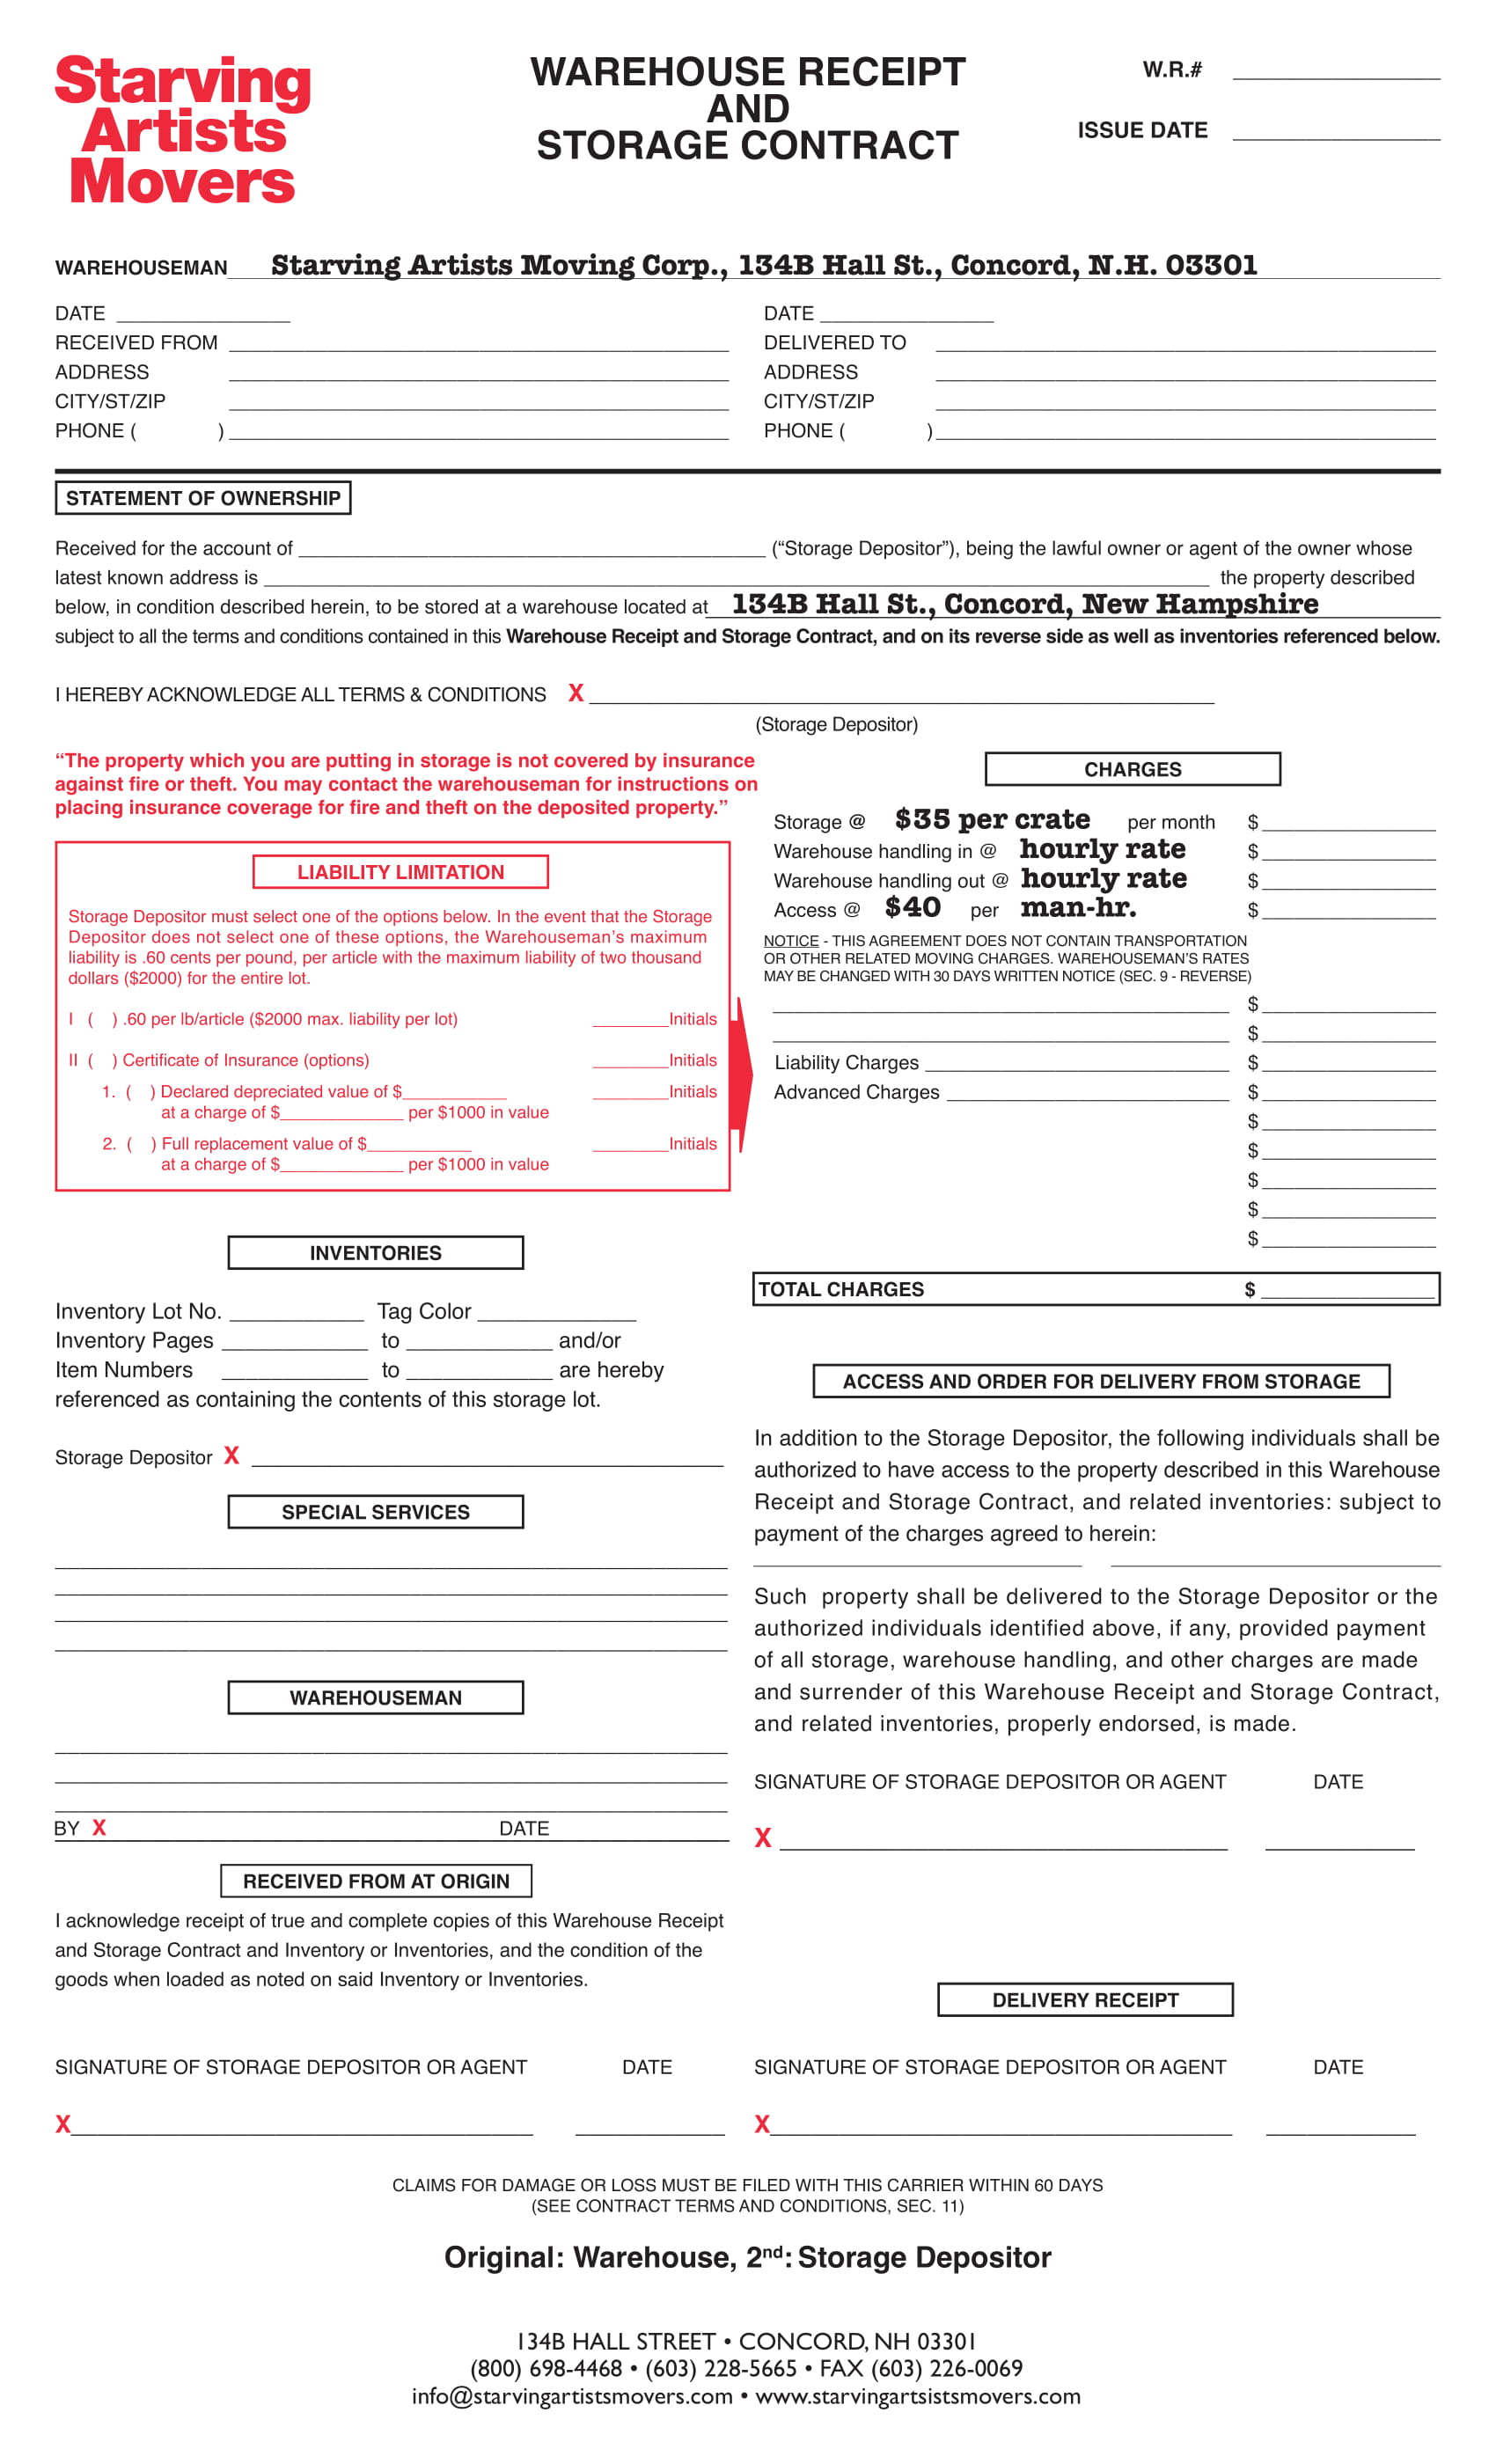 warehouse receipt contract form 1